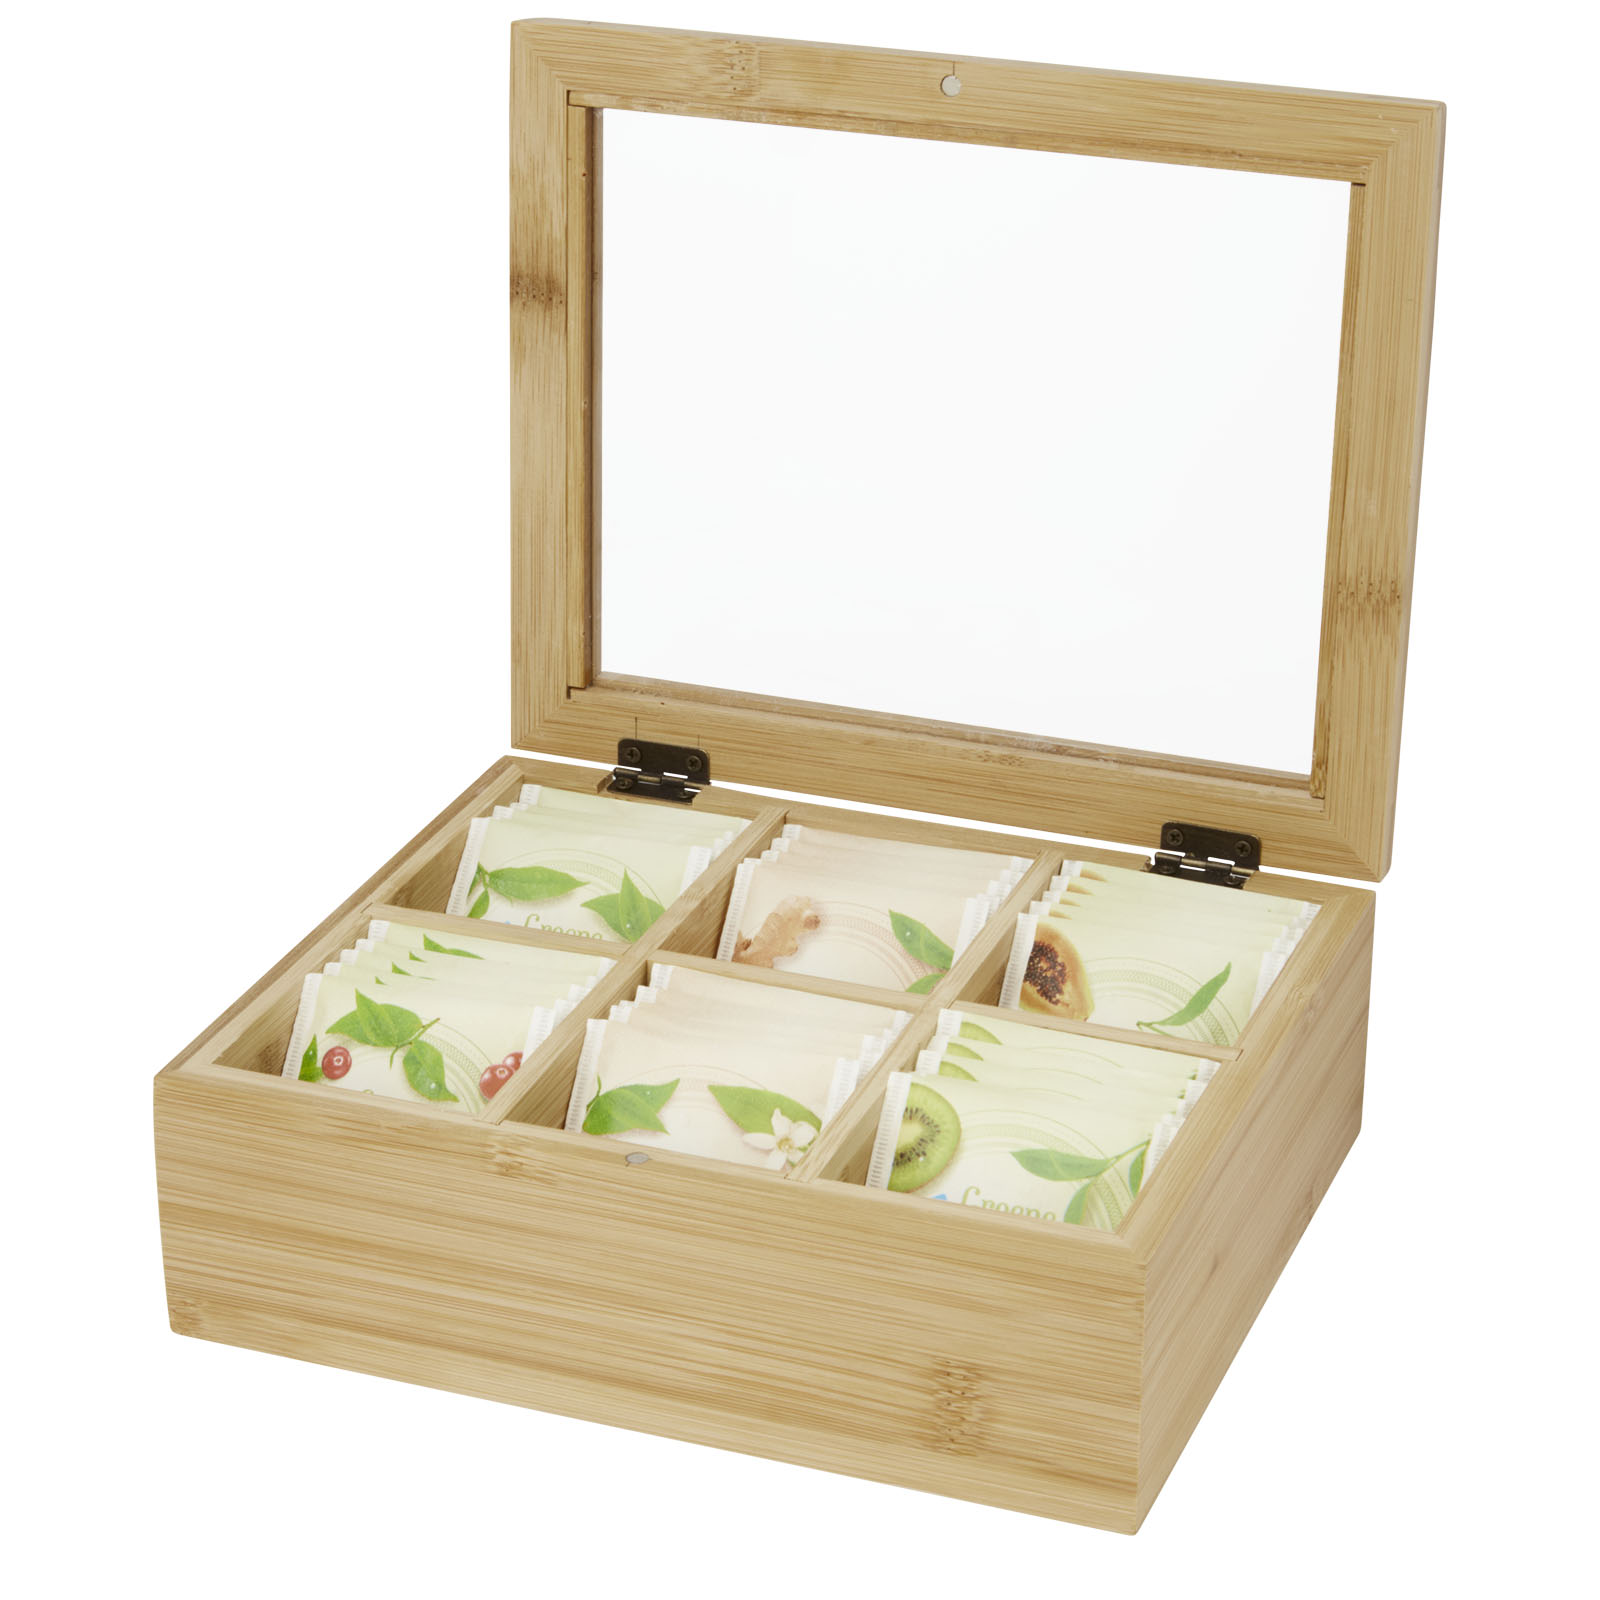 Bamboo Tea Box with Transparent Lid - Kingswinford